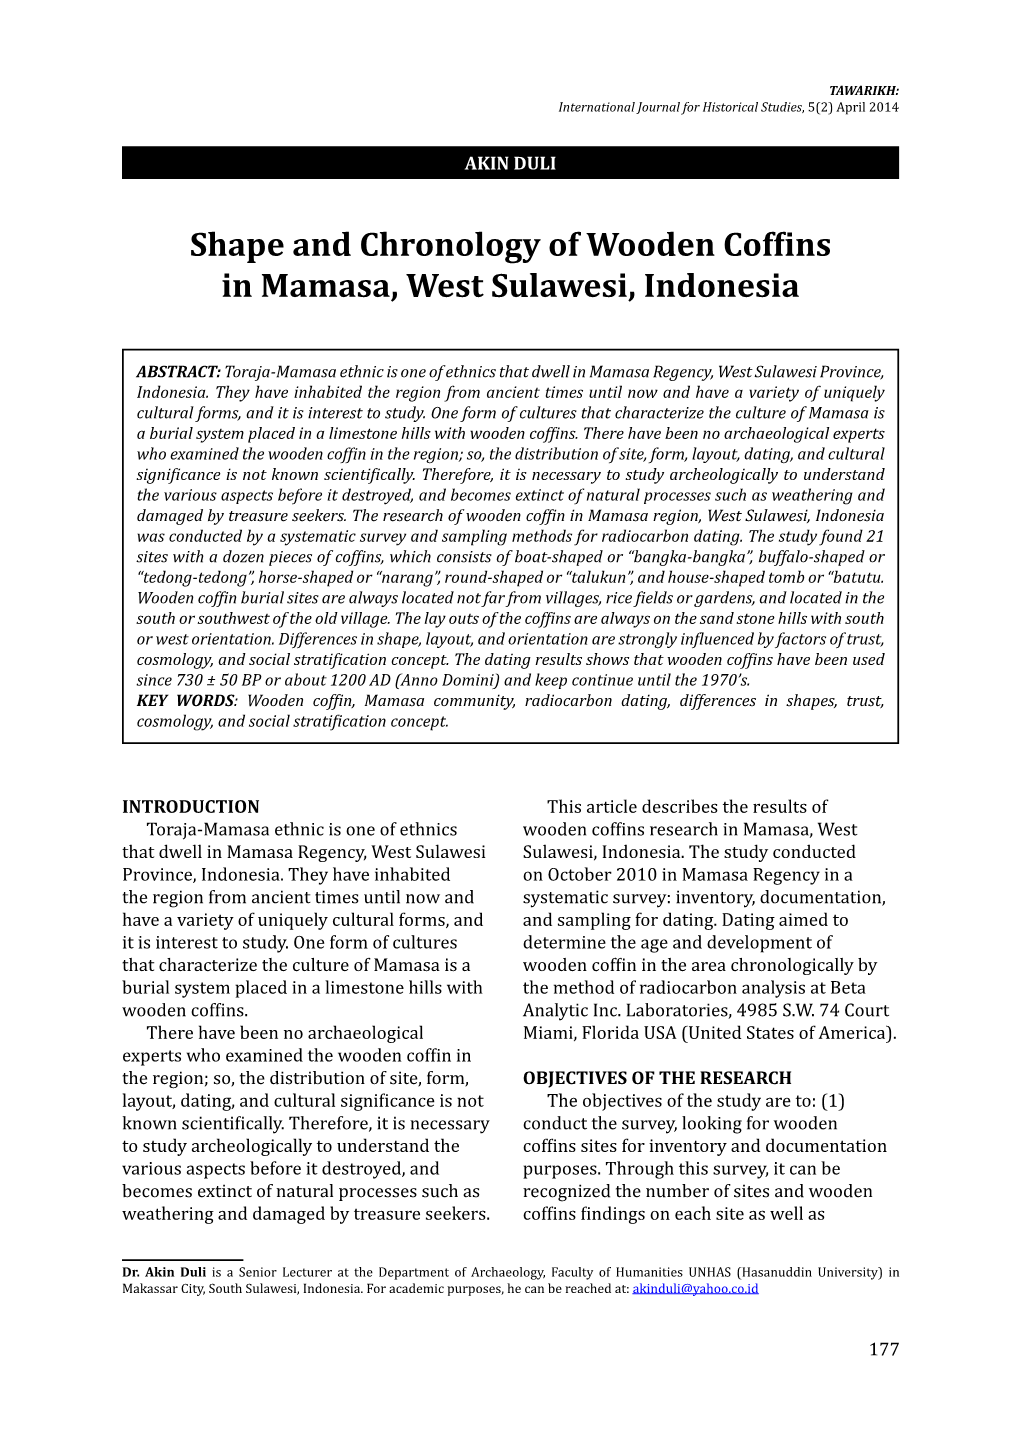 Shape and Chronology of Wooden Coffins in Mamasa, West Sulawesi, Indonesia